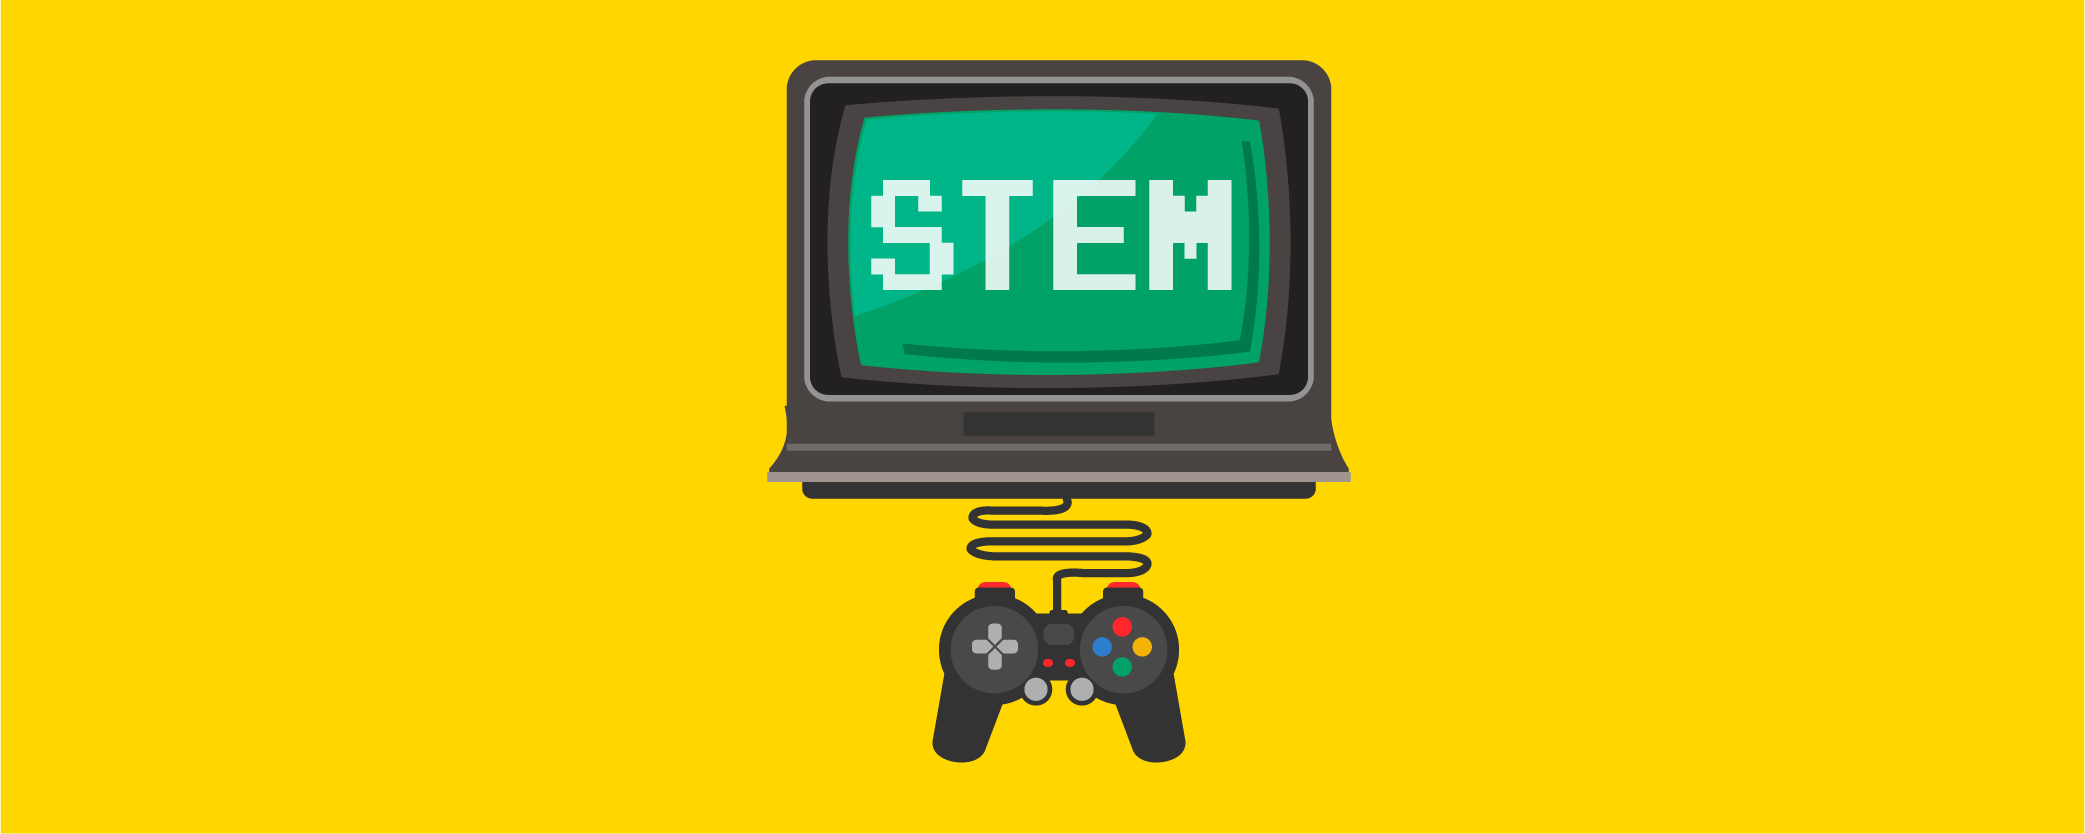 Game-based learning versus gamification